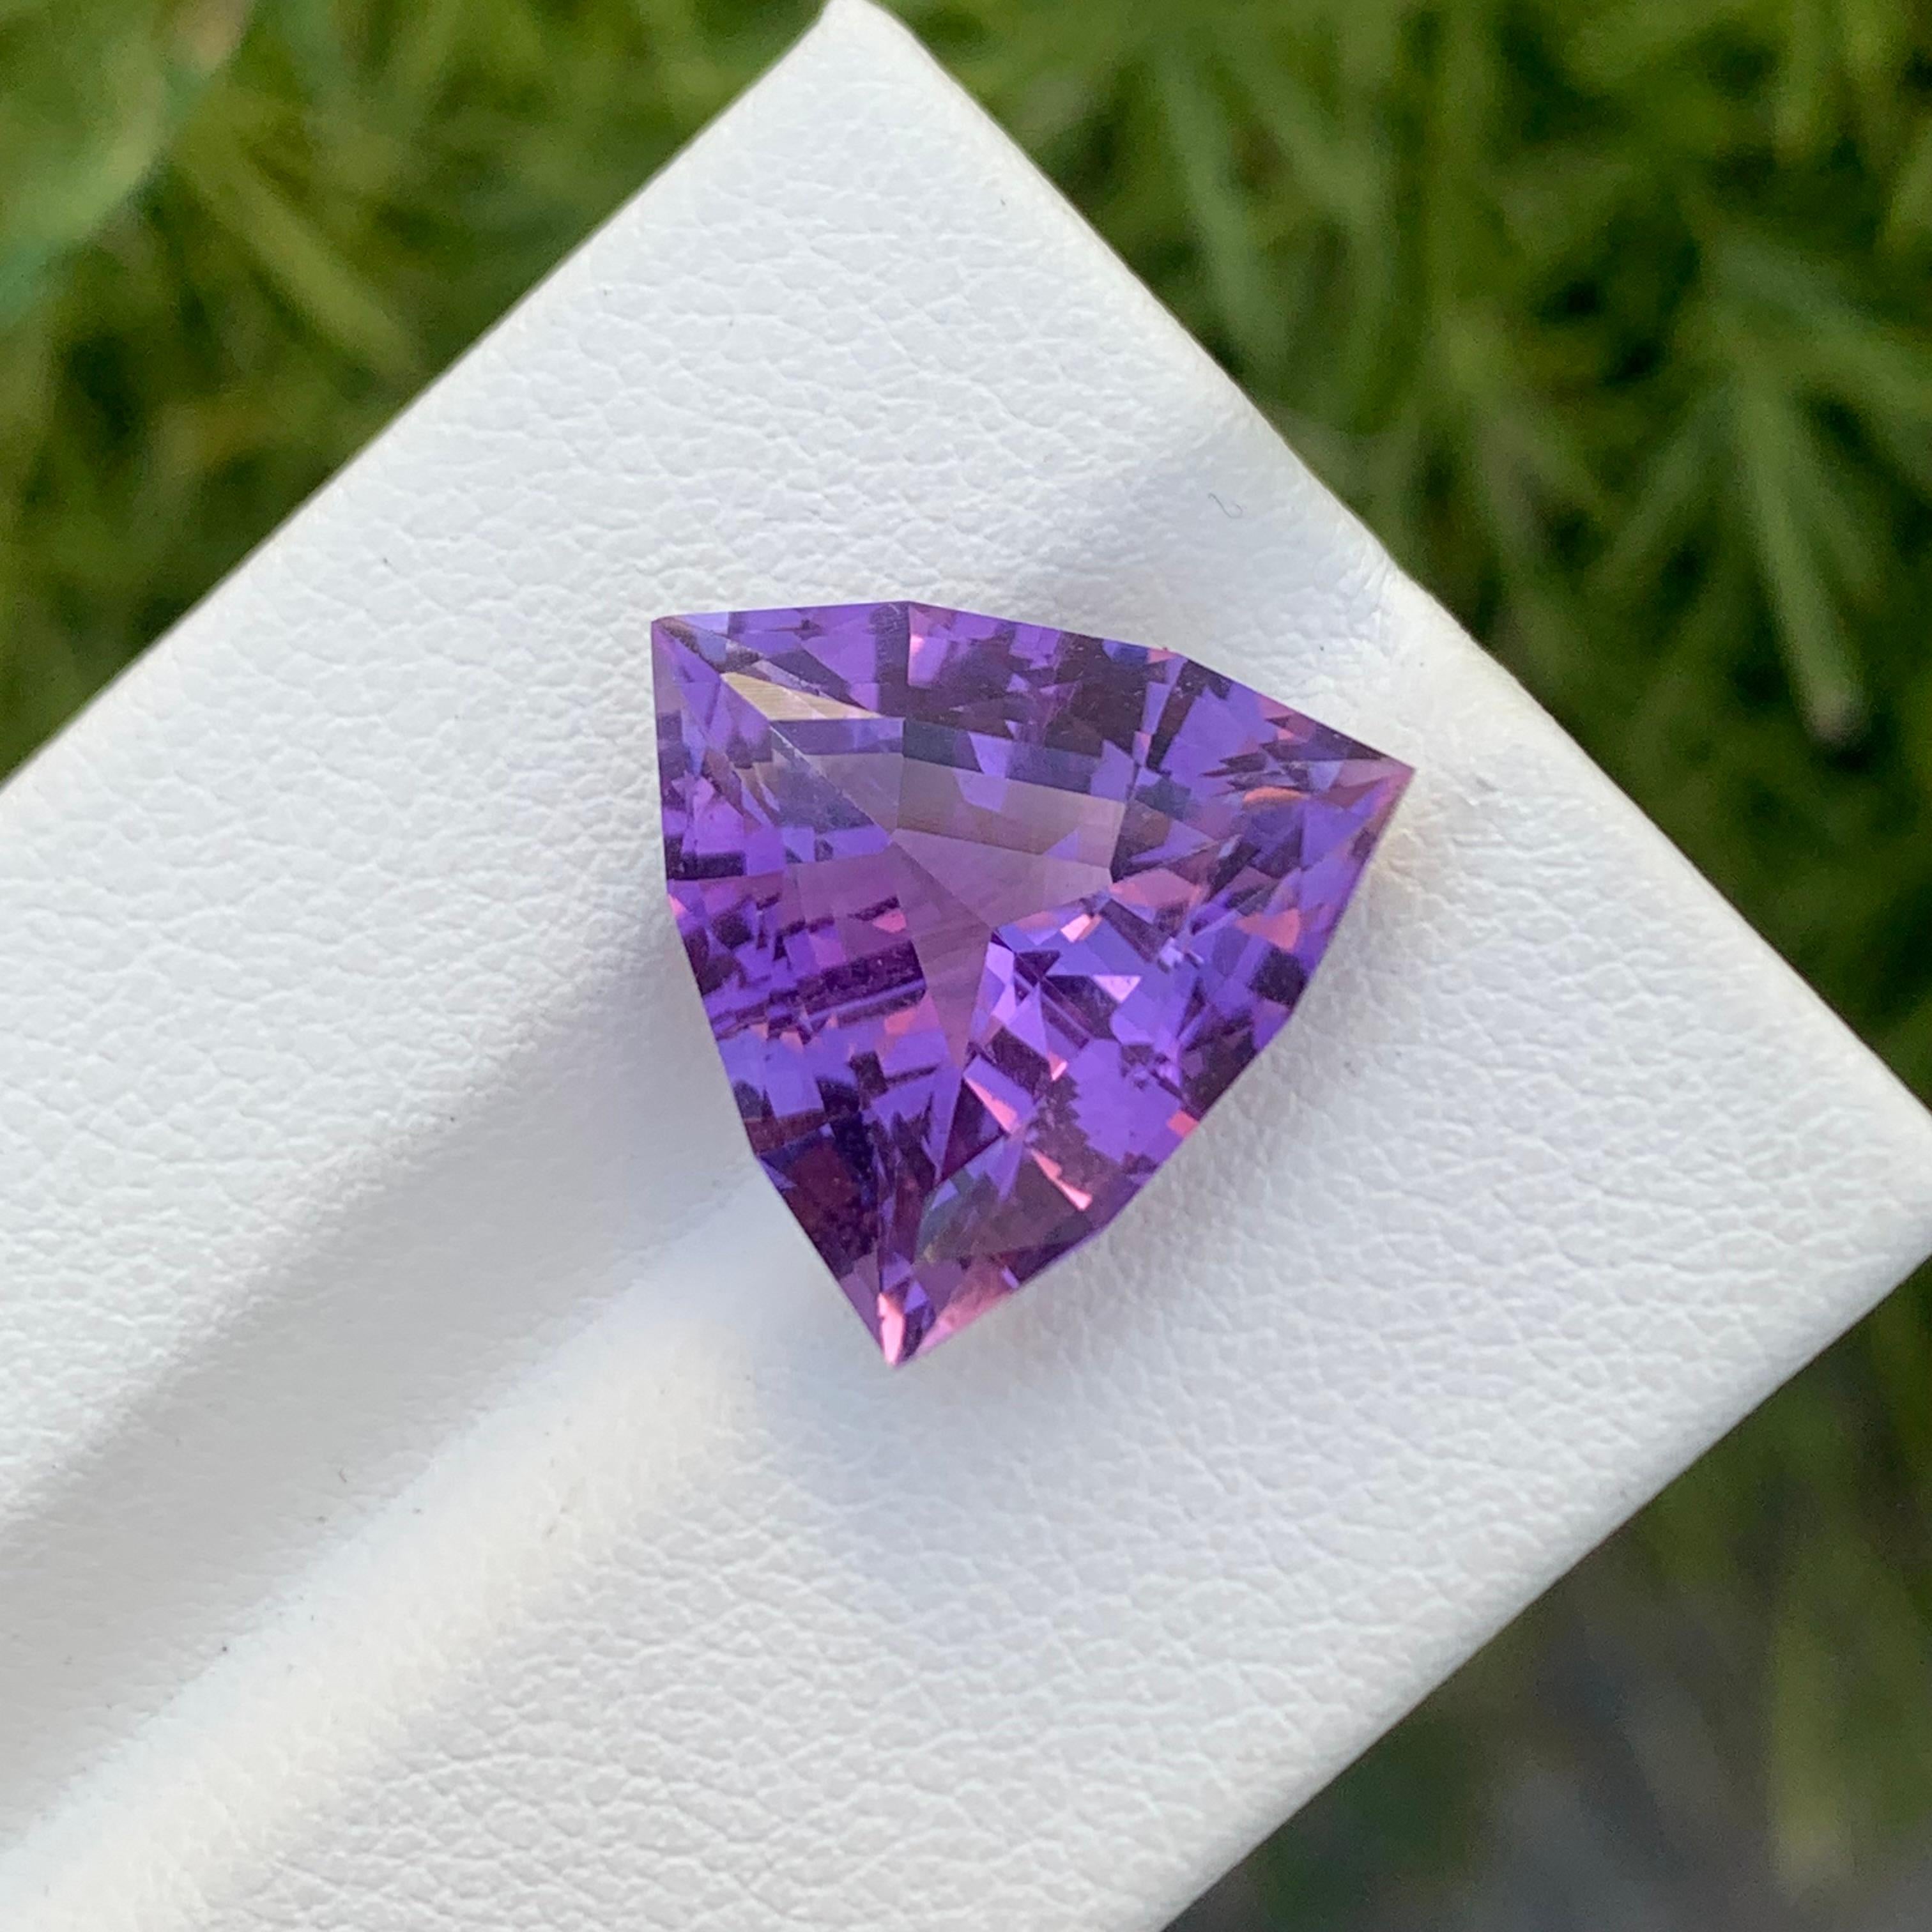 Loose Amethyst
Weight: 8.35 Carats
Dimension: 14.6 x 14.6 x 8.5 Mm
Colour: Purple
Origin: Brazil
Treatment: Non
Certificate: On Demand
Shape: Trillion 

Amethyst, a stunning variety of quartz known for its mesmerizing purple hue, has captivated